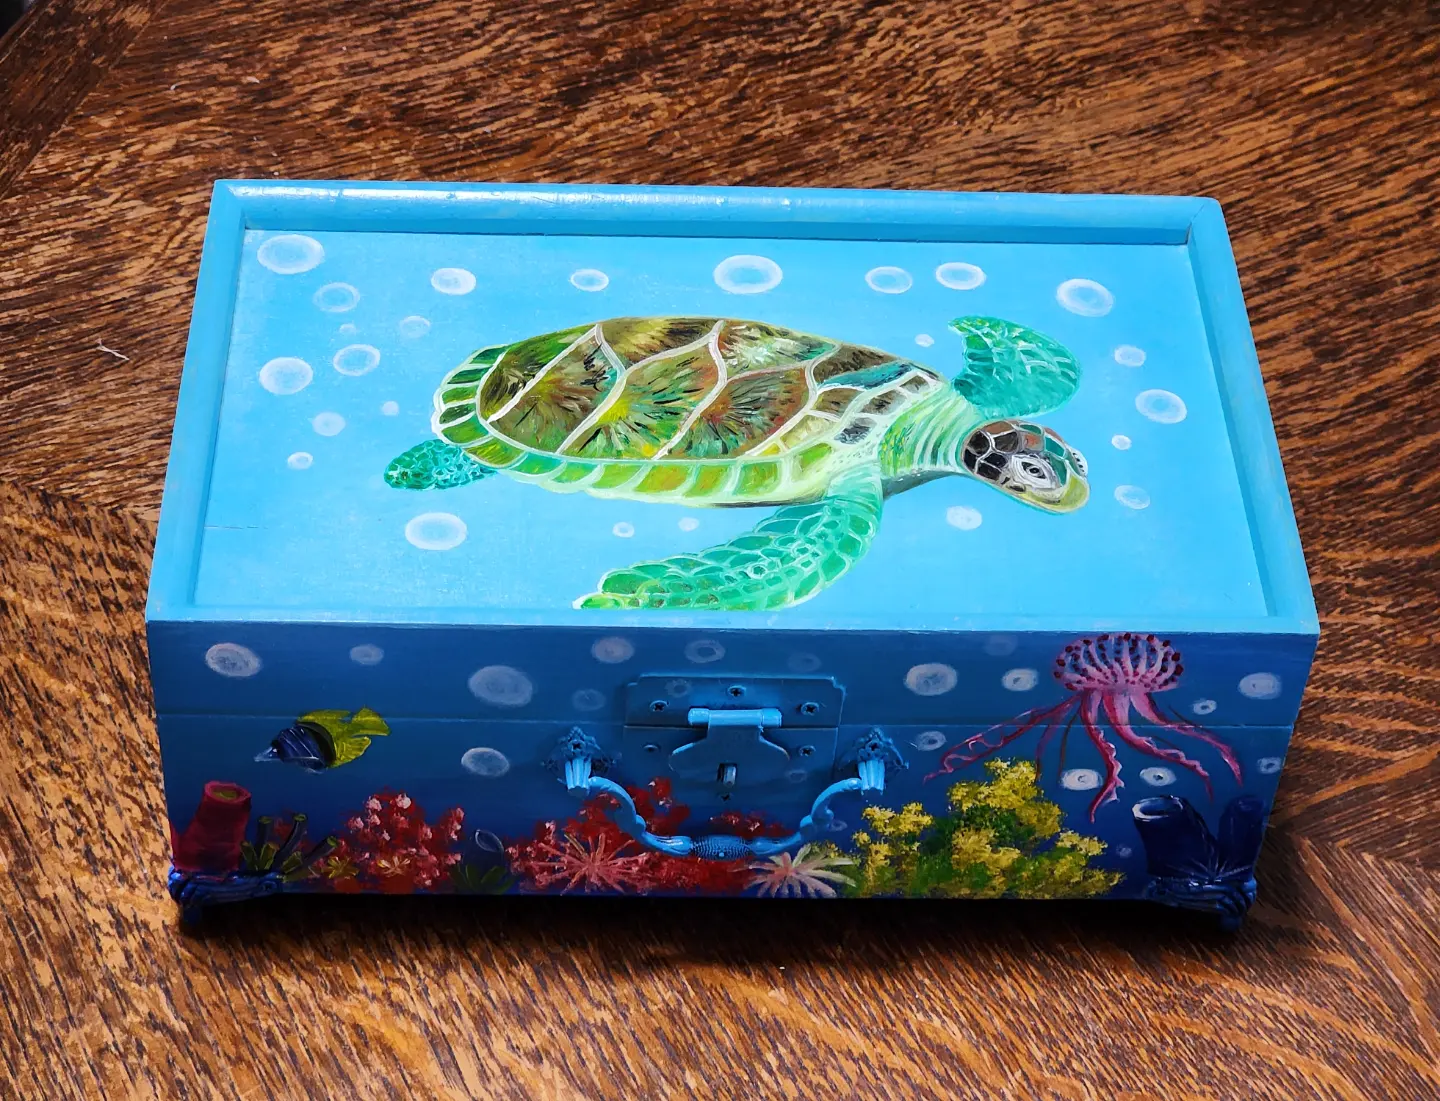 Beautiful handpainted trinket boxes with metal feet and a mirror. This cute trinket box is an ideal gift for a special loved one. You can store jewelry such as rings, necklaces, bracelets, or anything you would like to keep in a particular place, especially in this lovely and artistic trinket box.